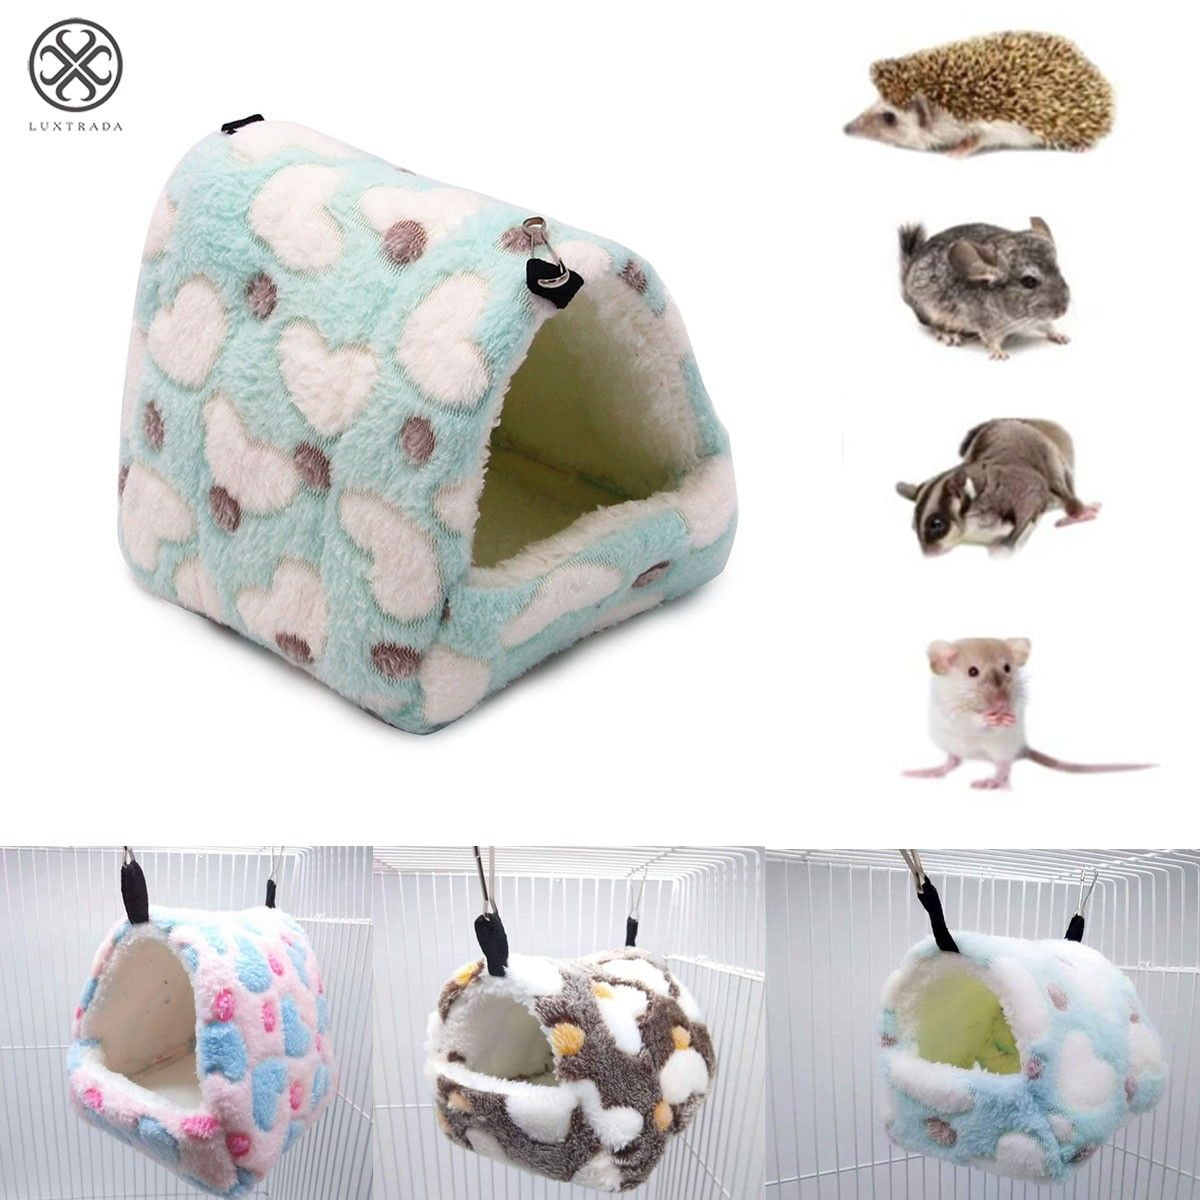 warm bed rat hammock squirrel winter toys pet hamster cage house hanging nest GX 